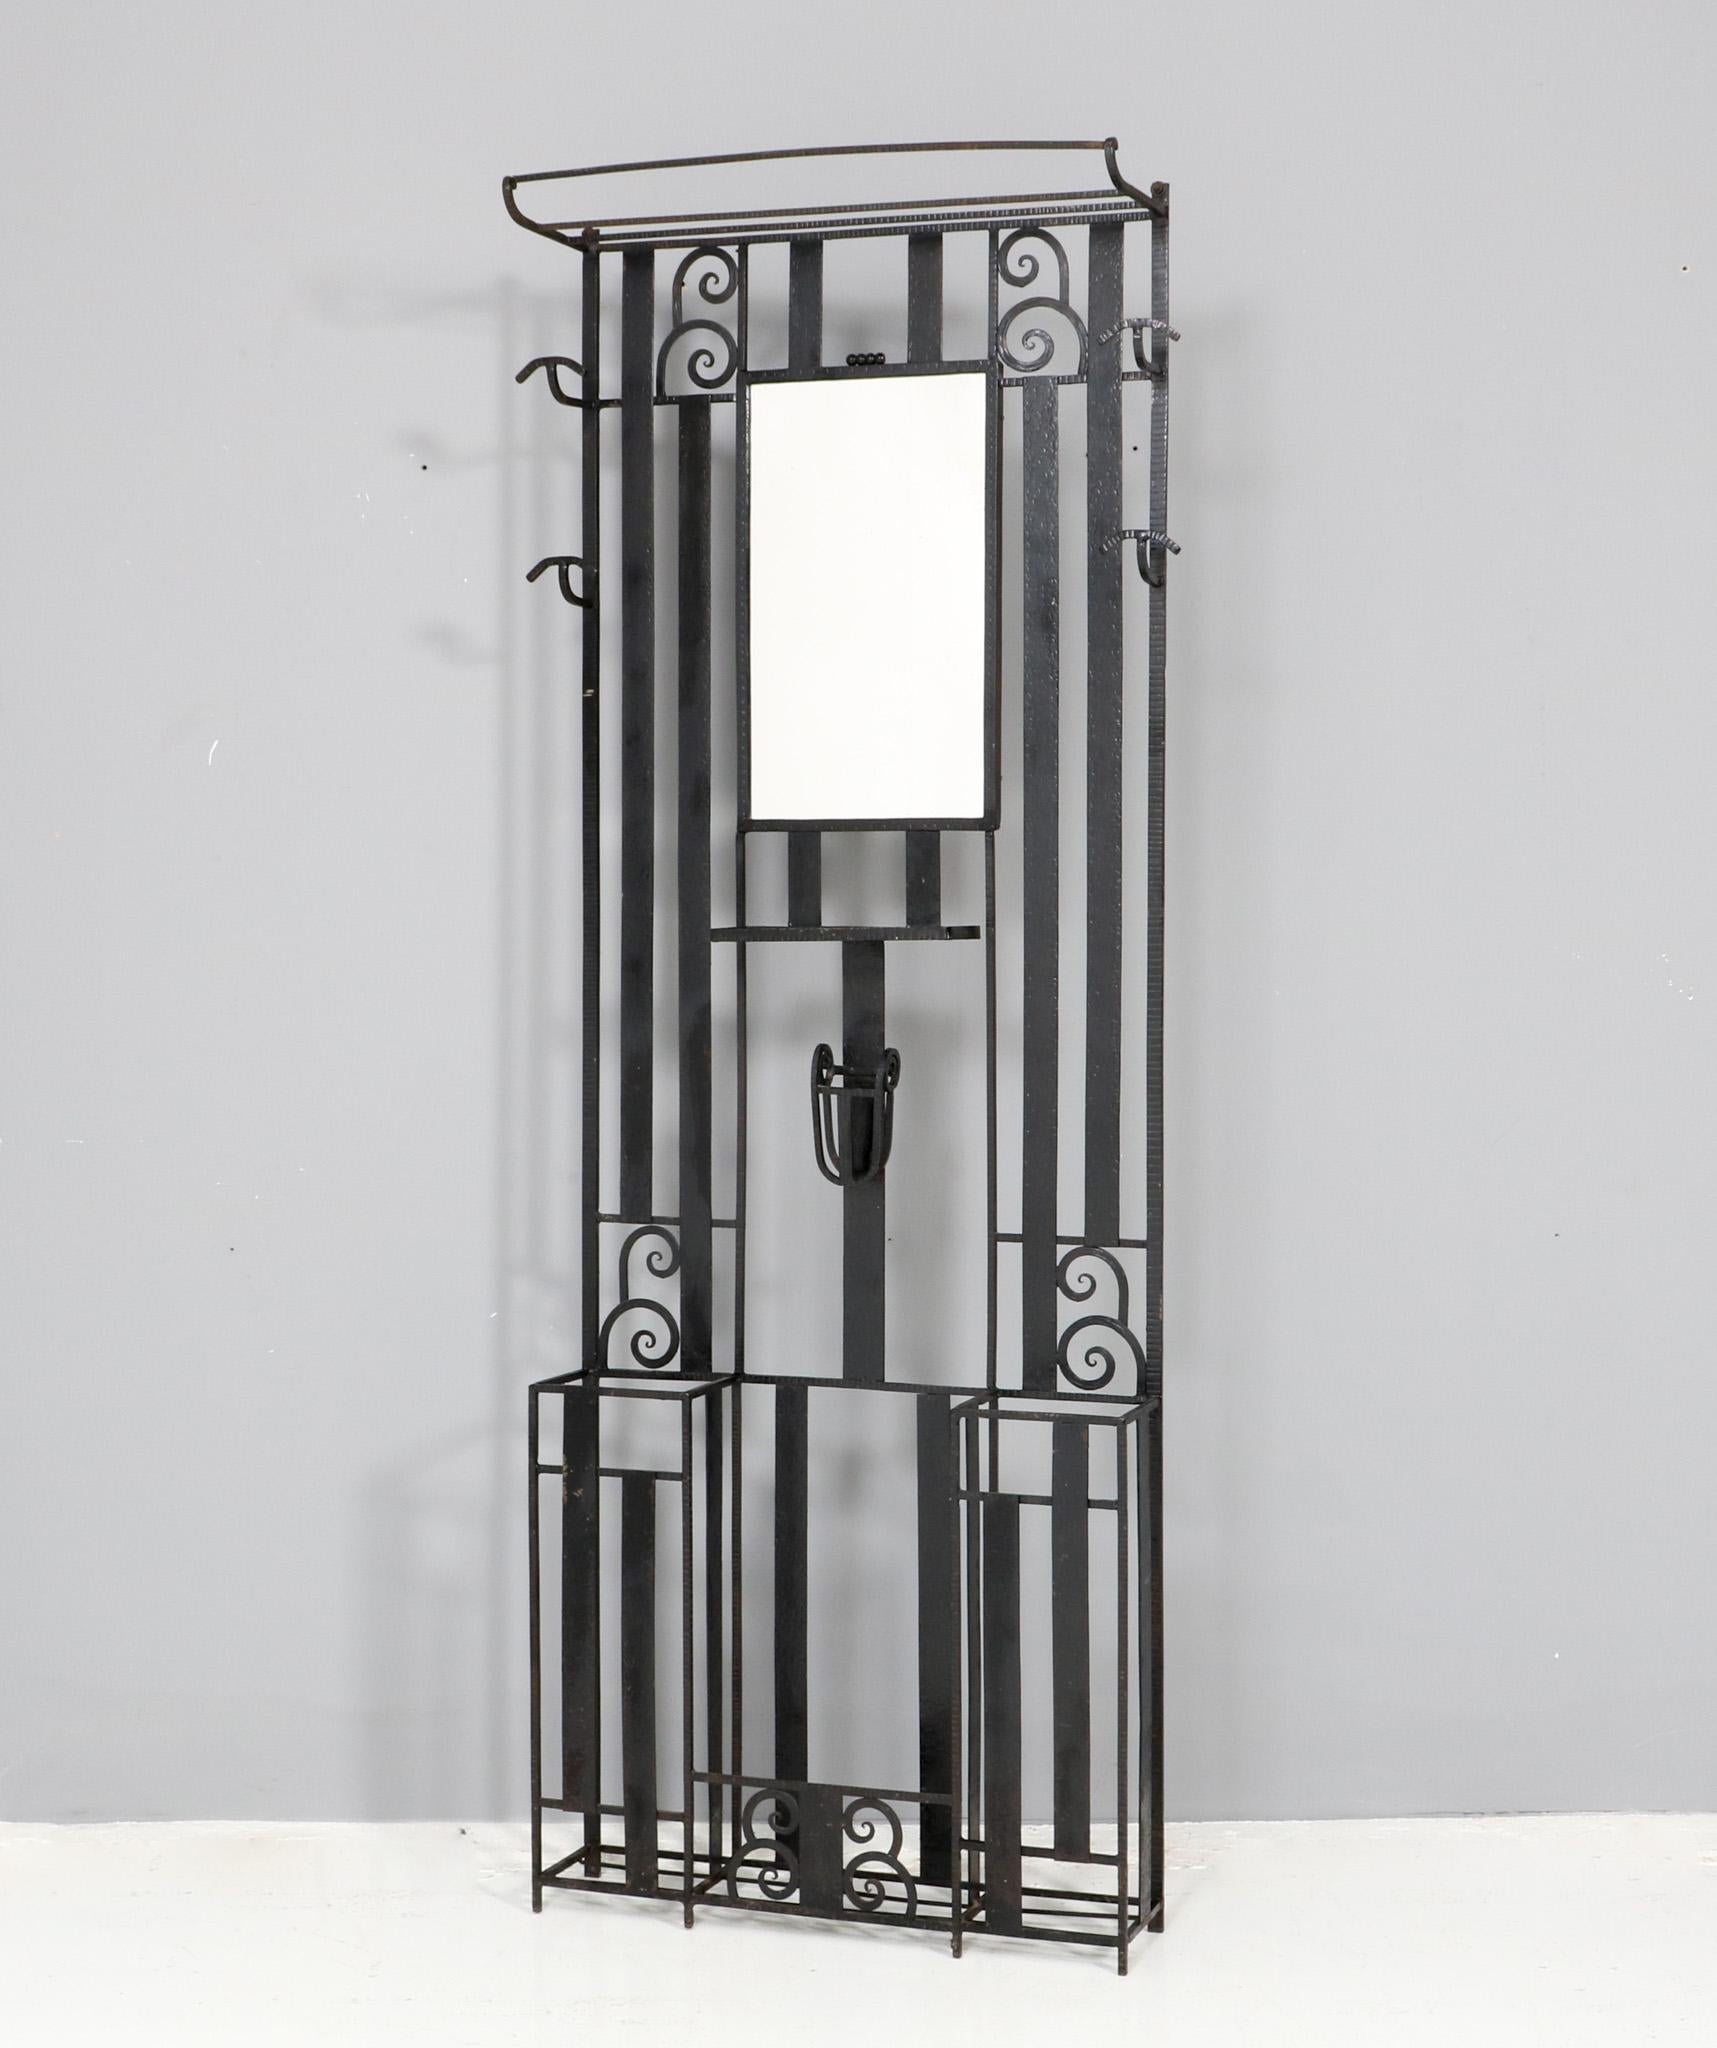 Stunning Art Deco hall tree or port-manteau
The design is in the style of the famous designer Edgar Brandt.
Striking French design from the 1930s.
Patinated hammered and wrought iron frame with hatrack and mirror.
Four original hammered and wrought